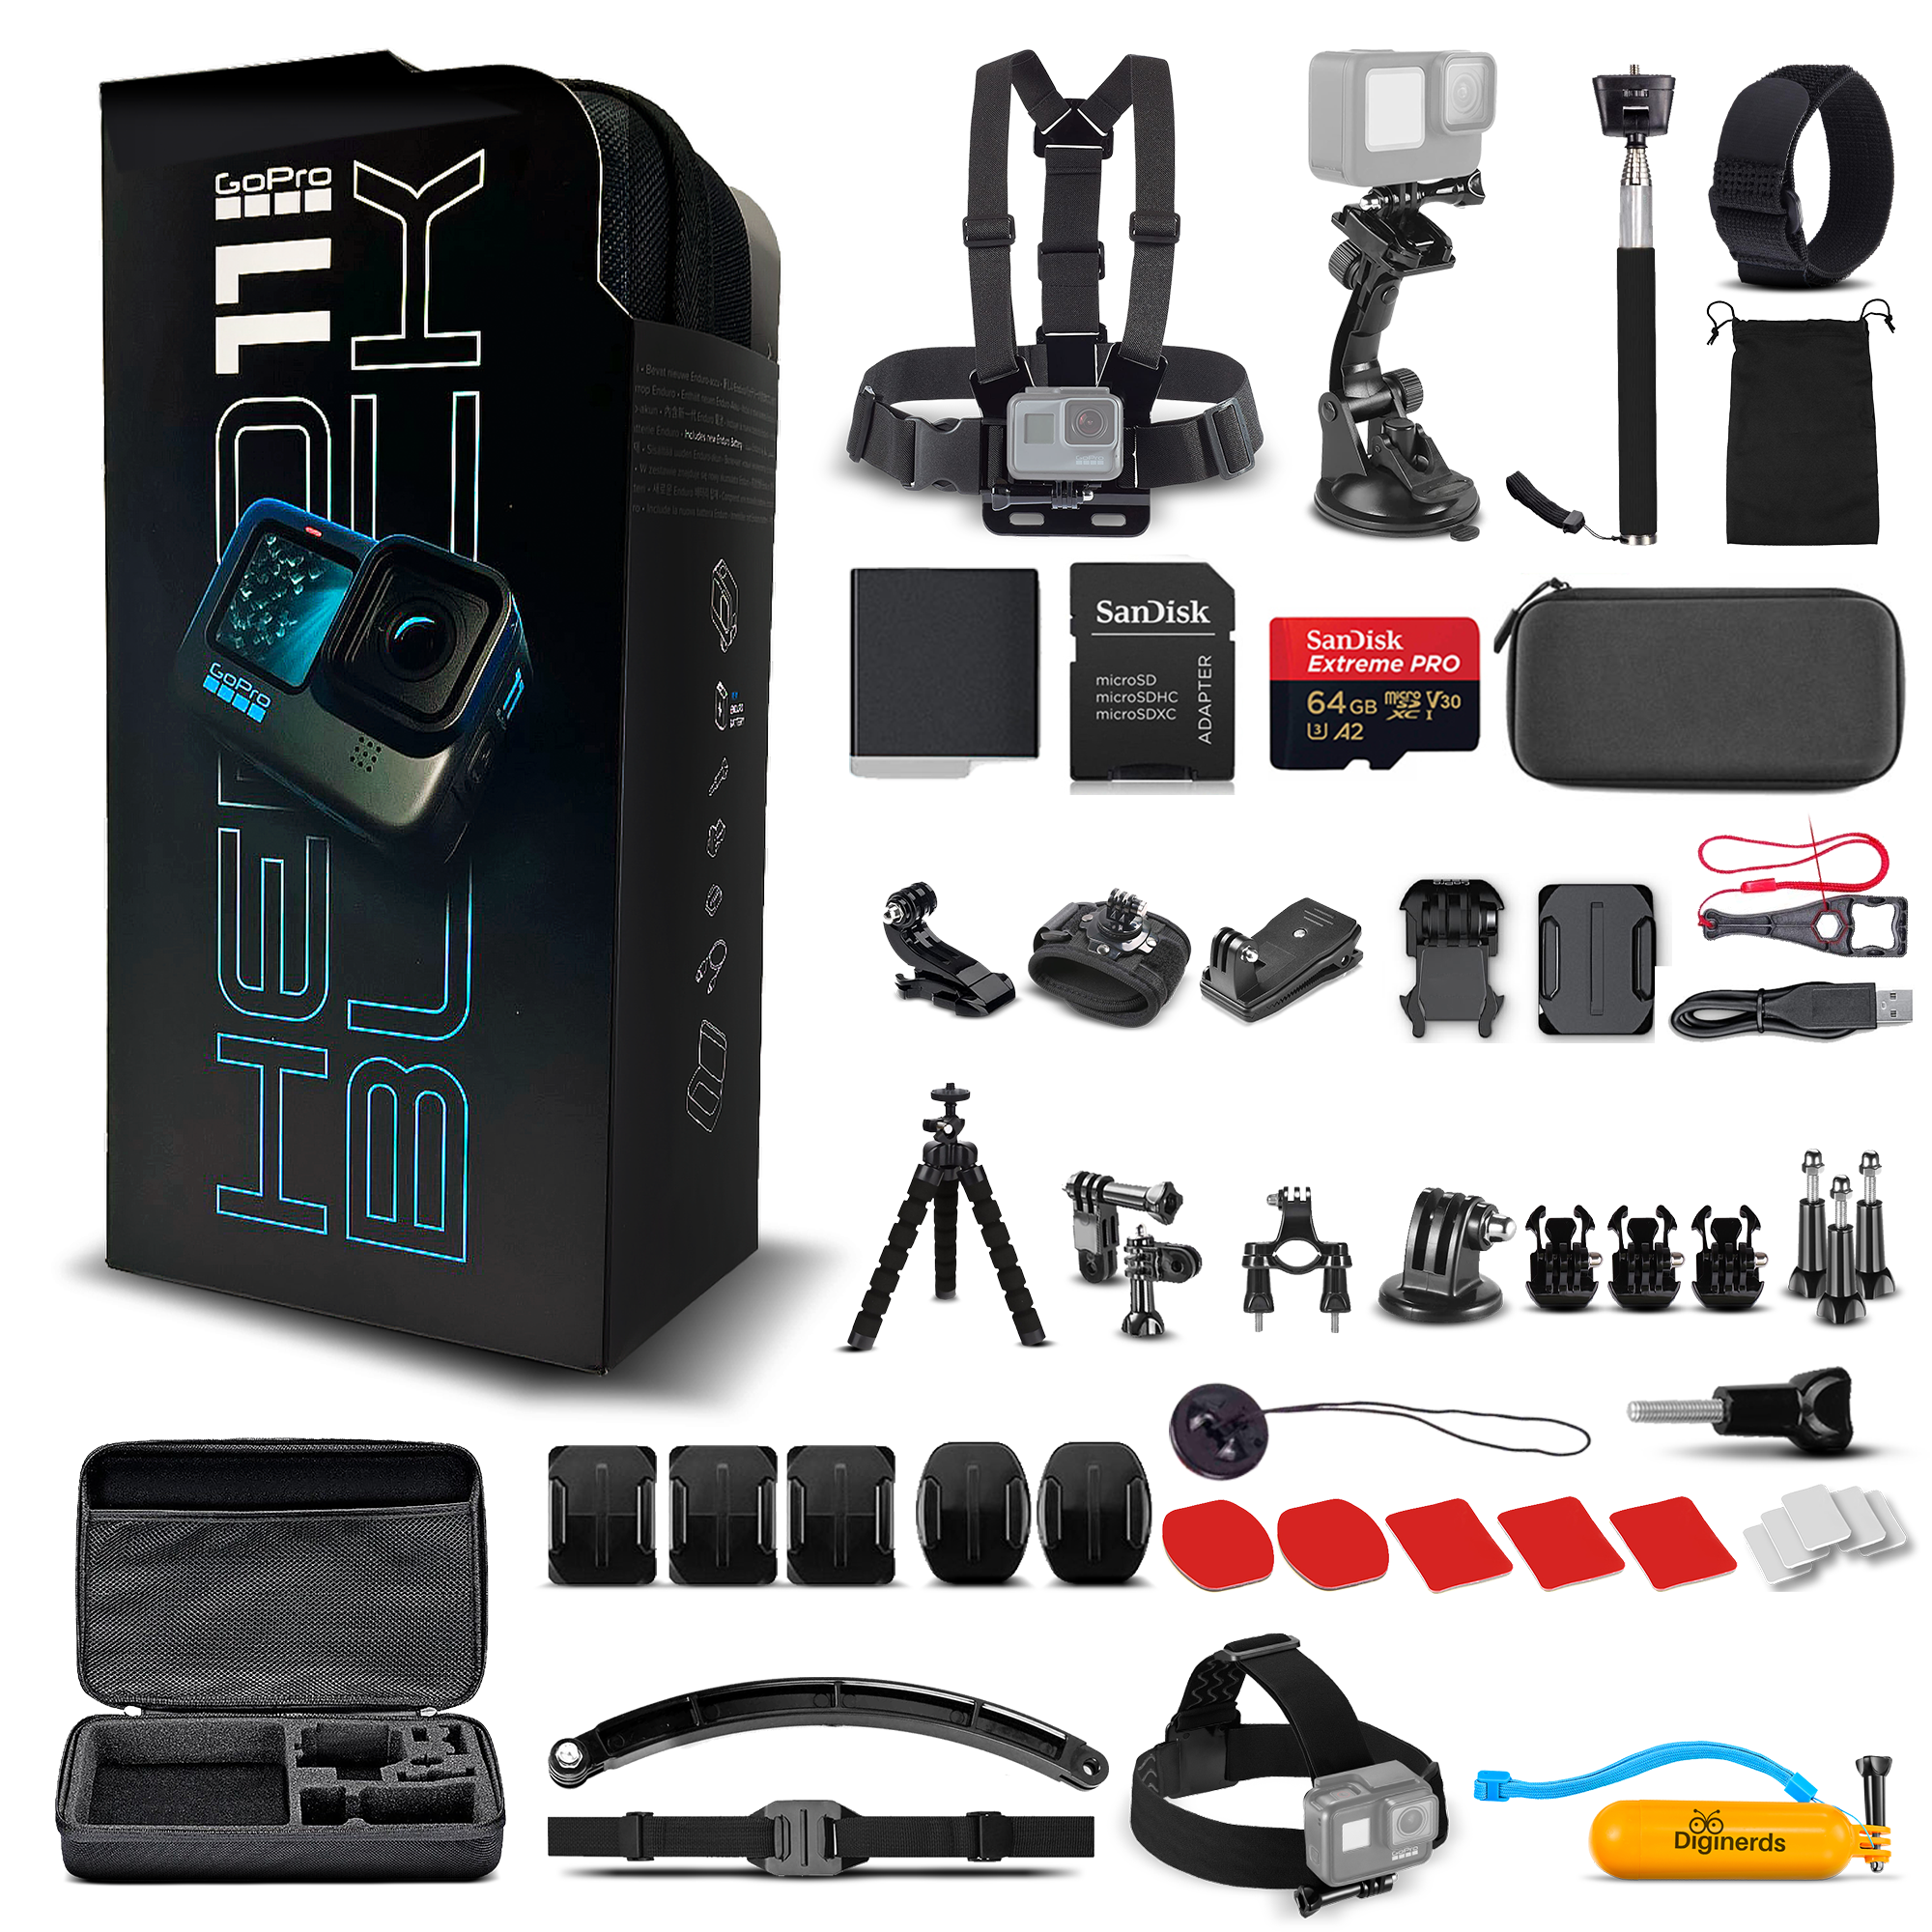 GoPro HERO11 Black (New) - 27MP Waterproof Camera with 5.3K Video + 64GB Card and DigiNerds 50-piece Action Kit - image 1 of 9